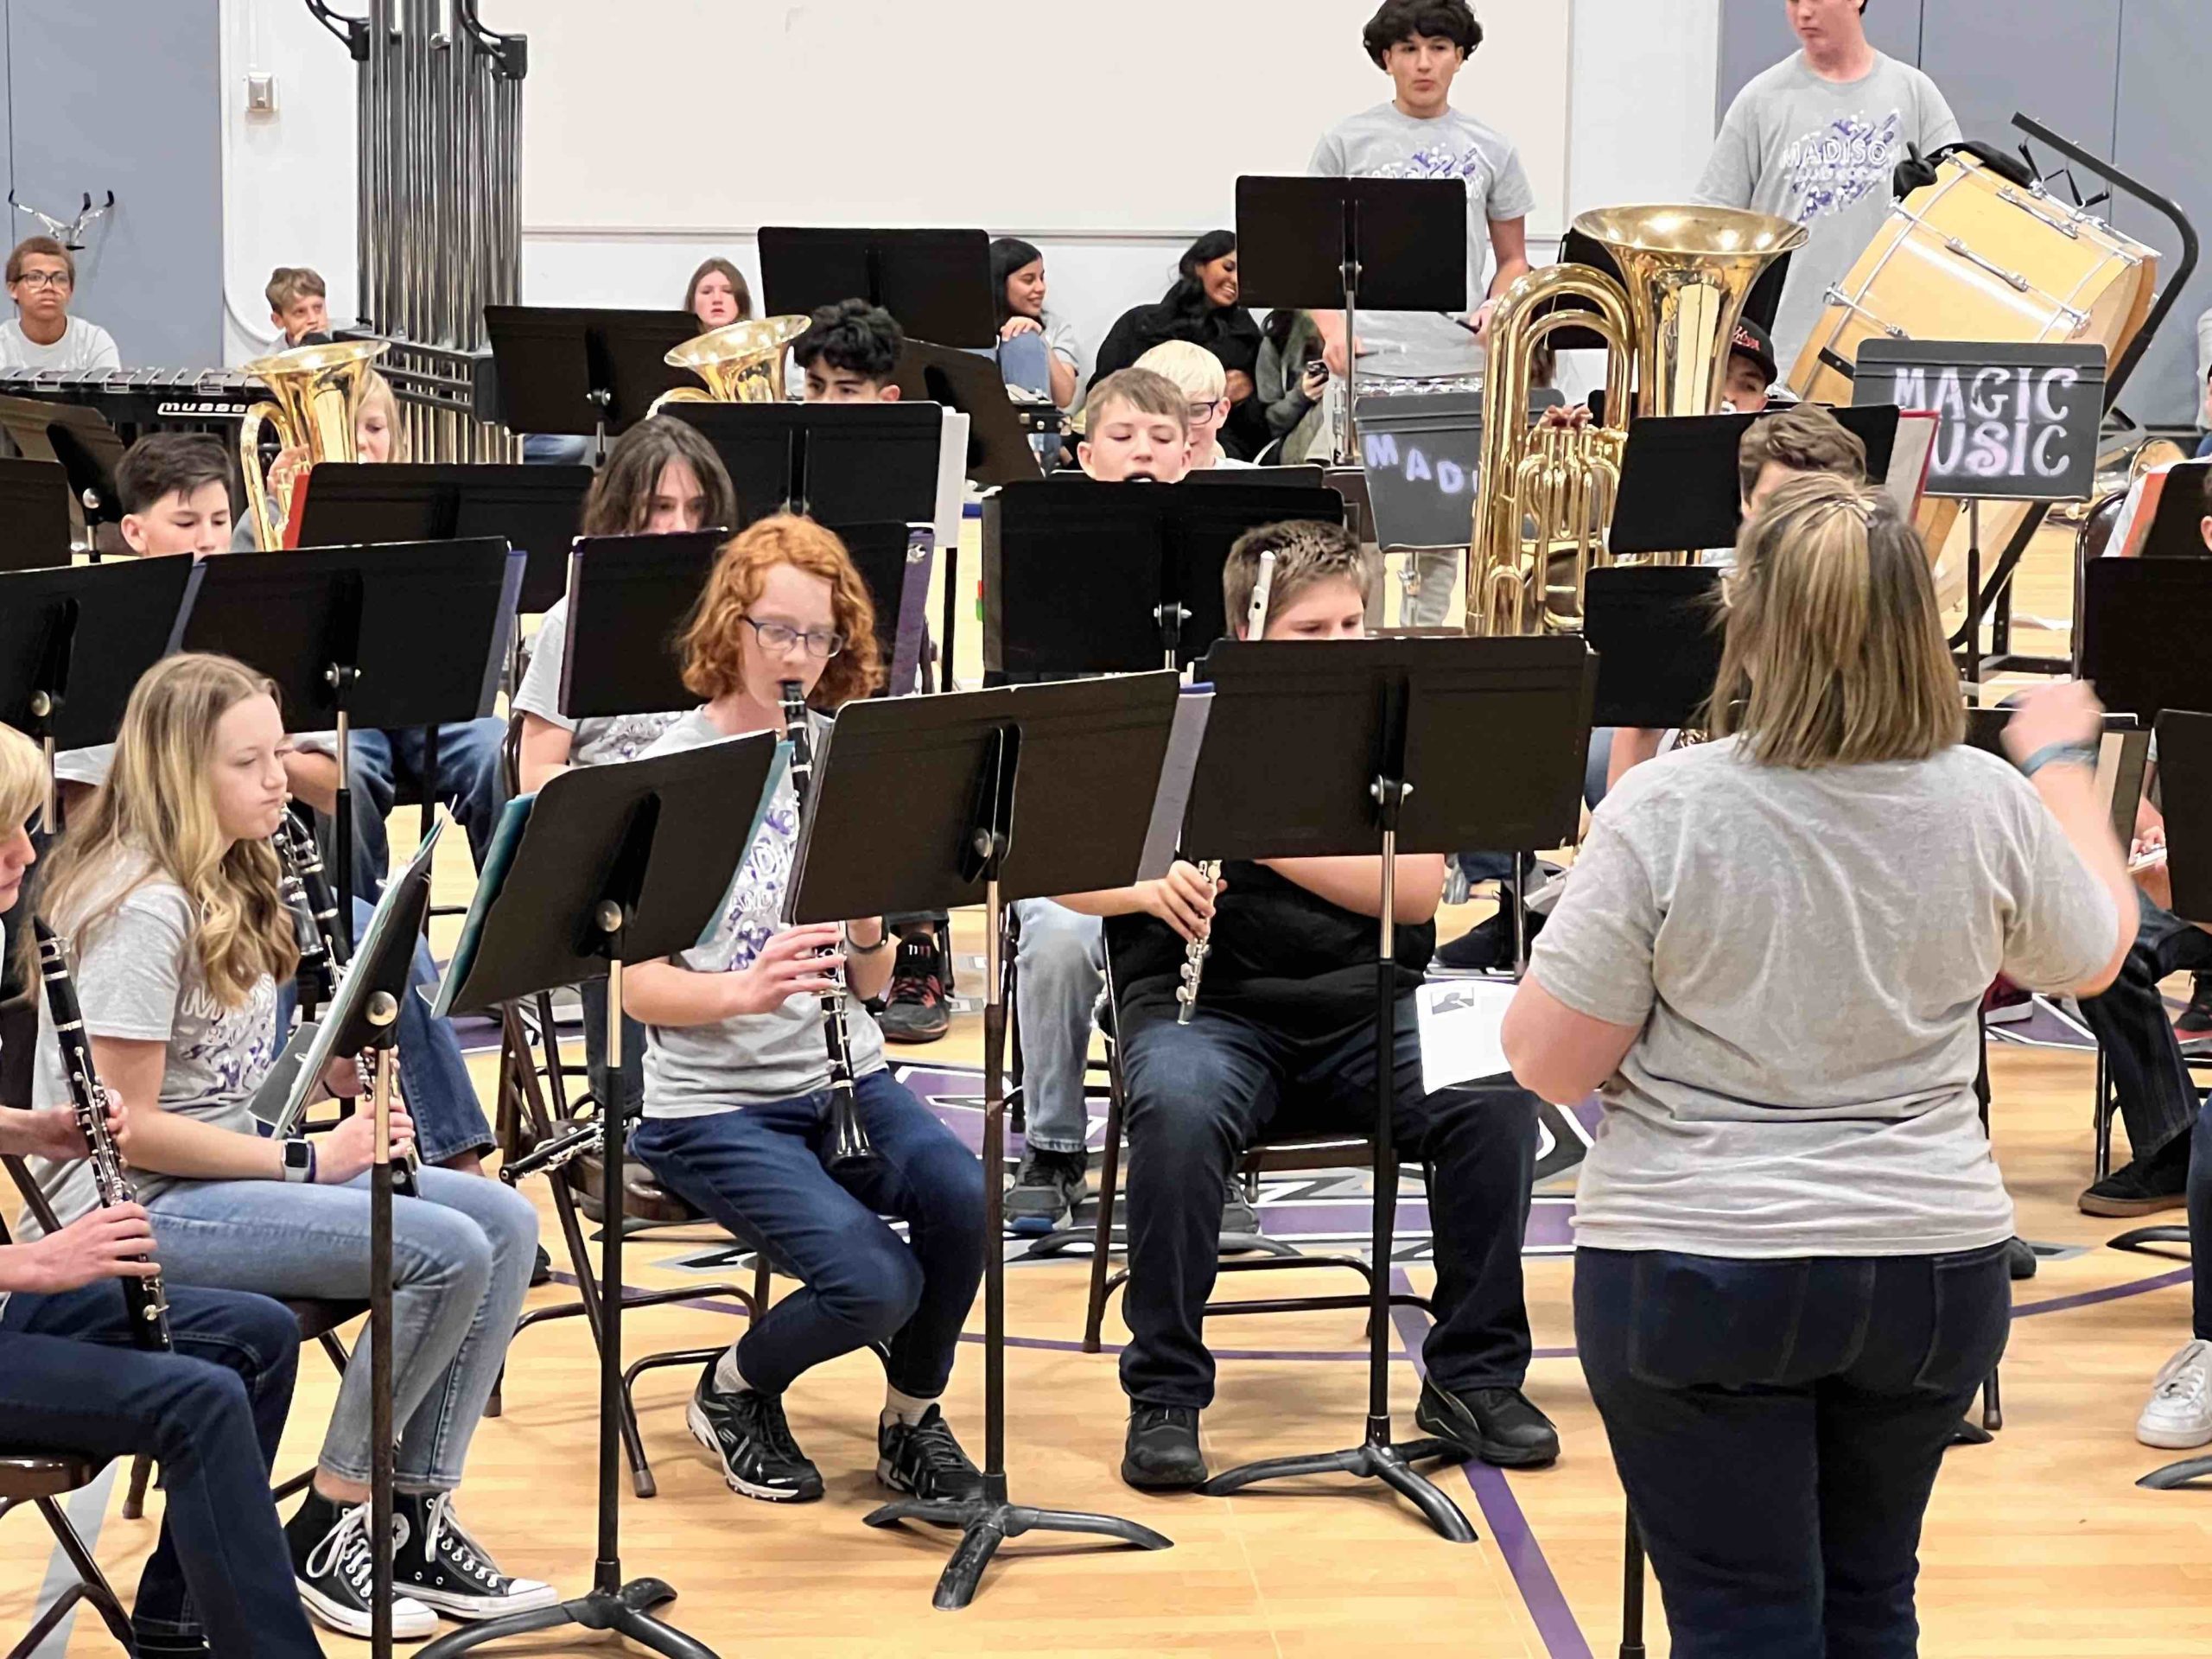 Madison MIddle School band performance Dec. 1, 2022